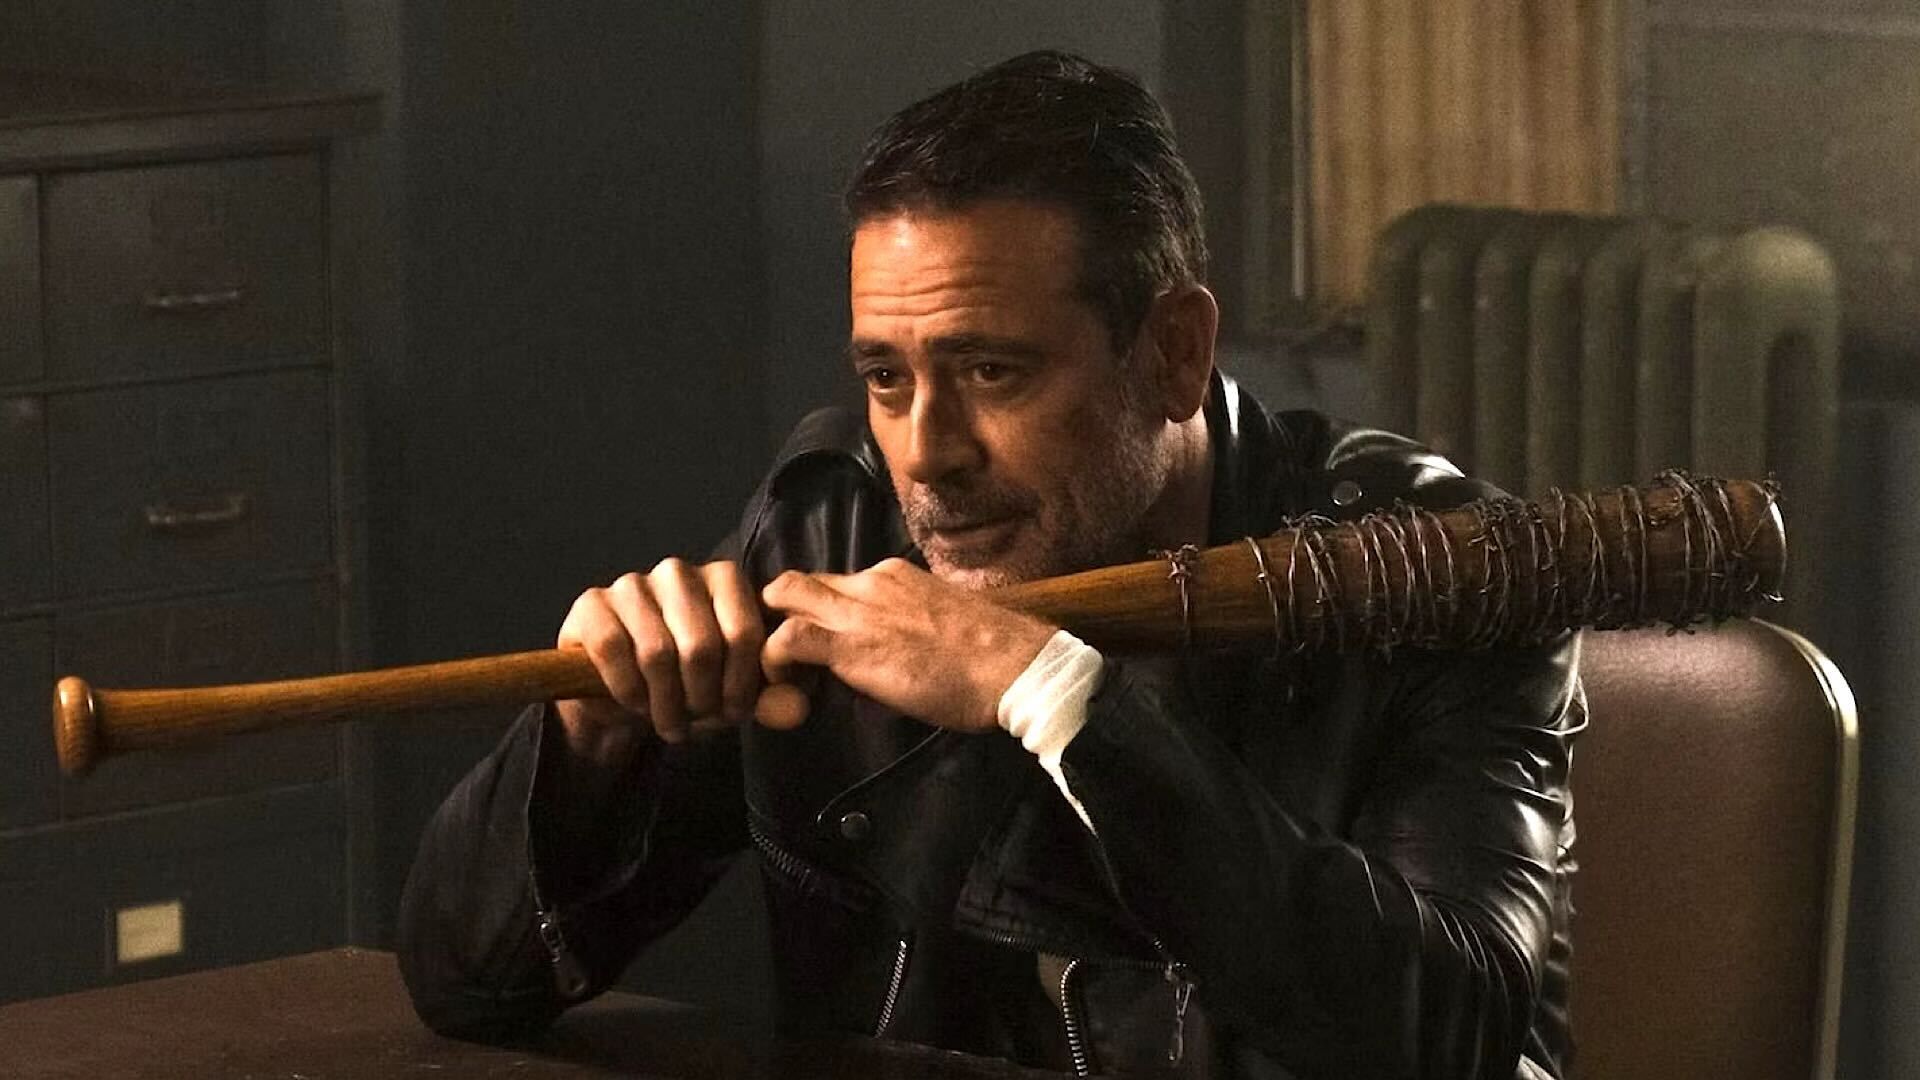 Jeffrey Dean Morgan as Negan holding Lucille at a table